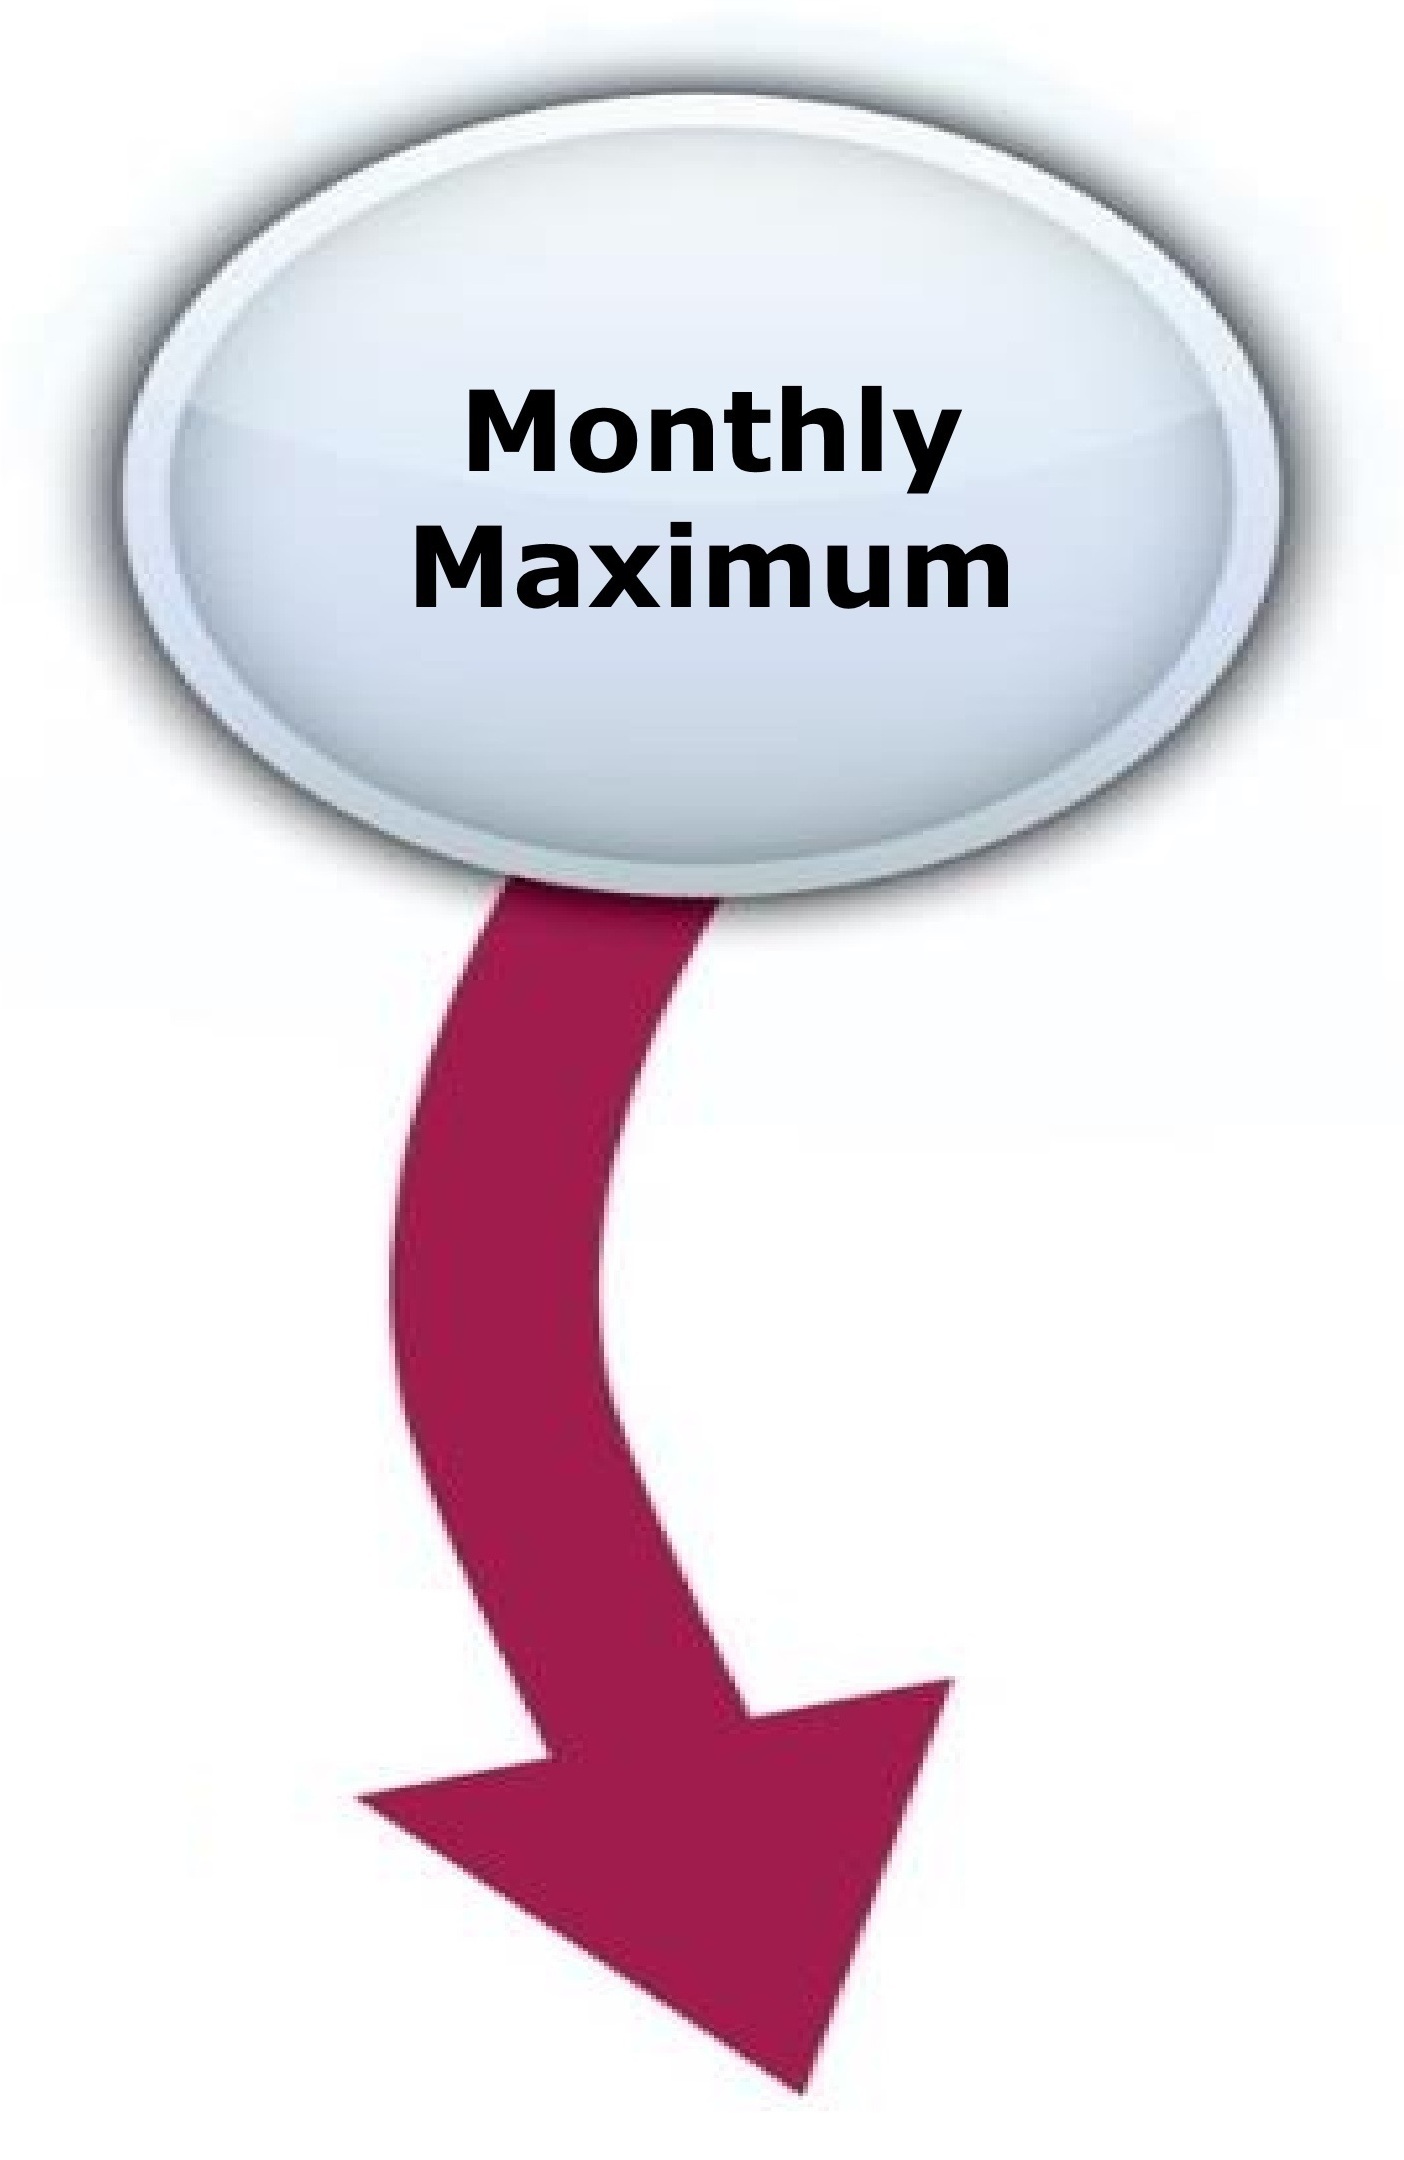 long-term care insurance monthly maximum image